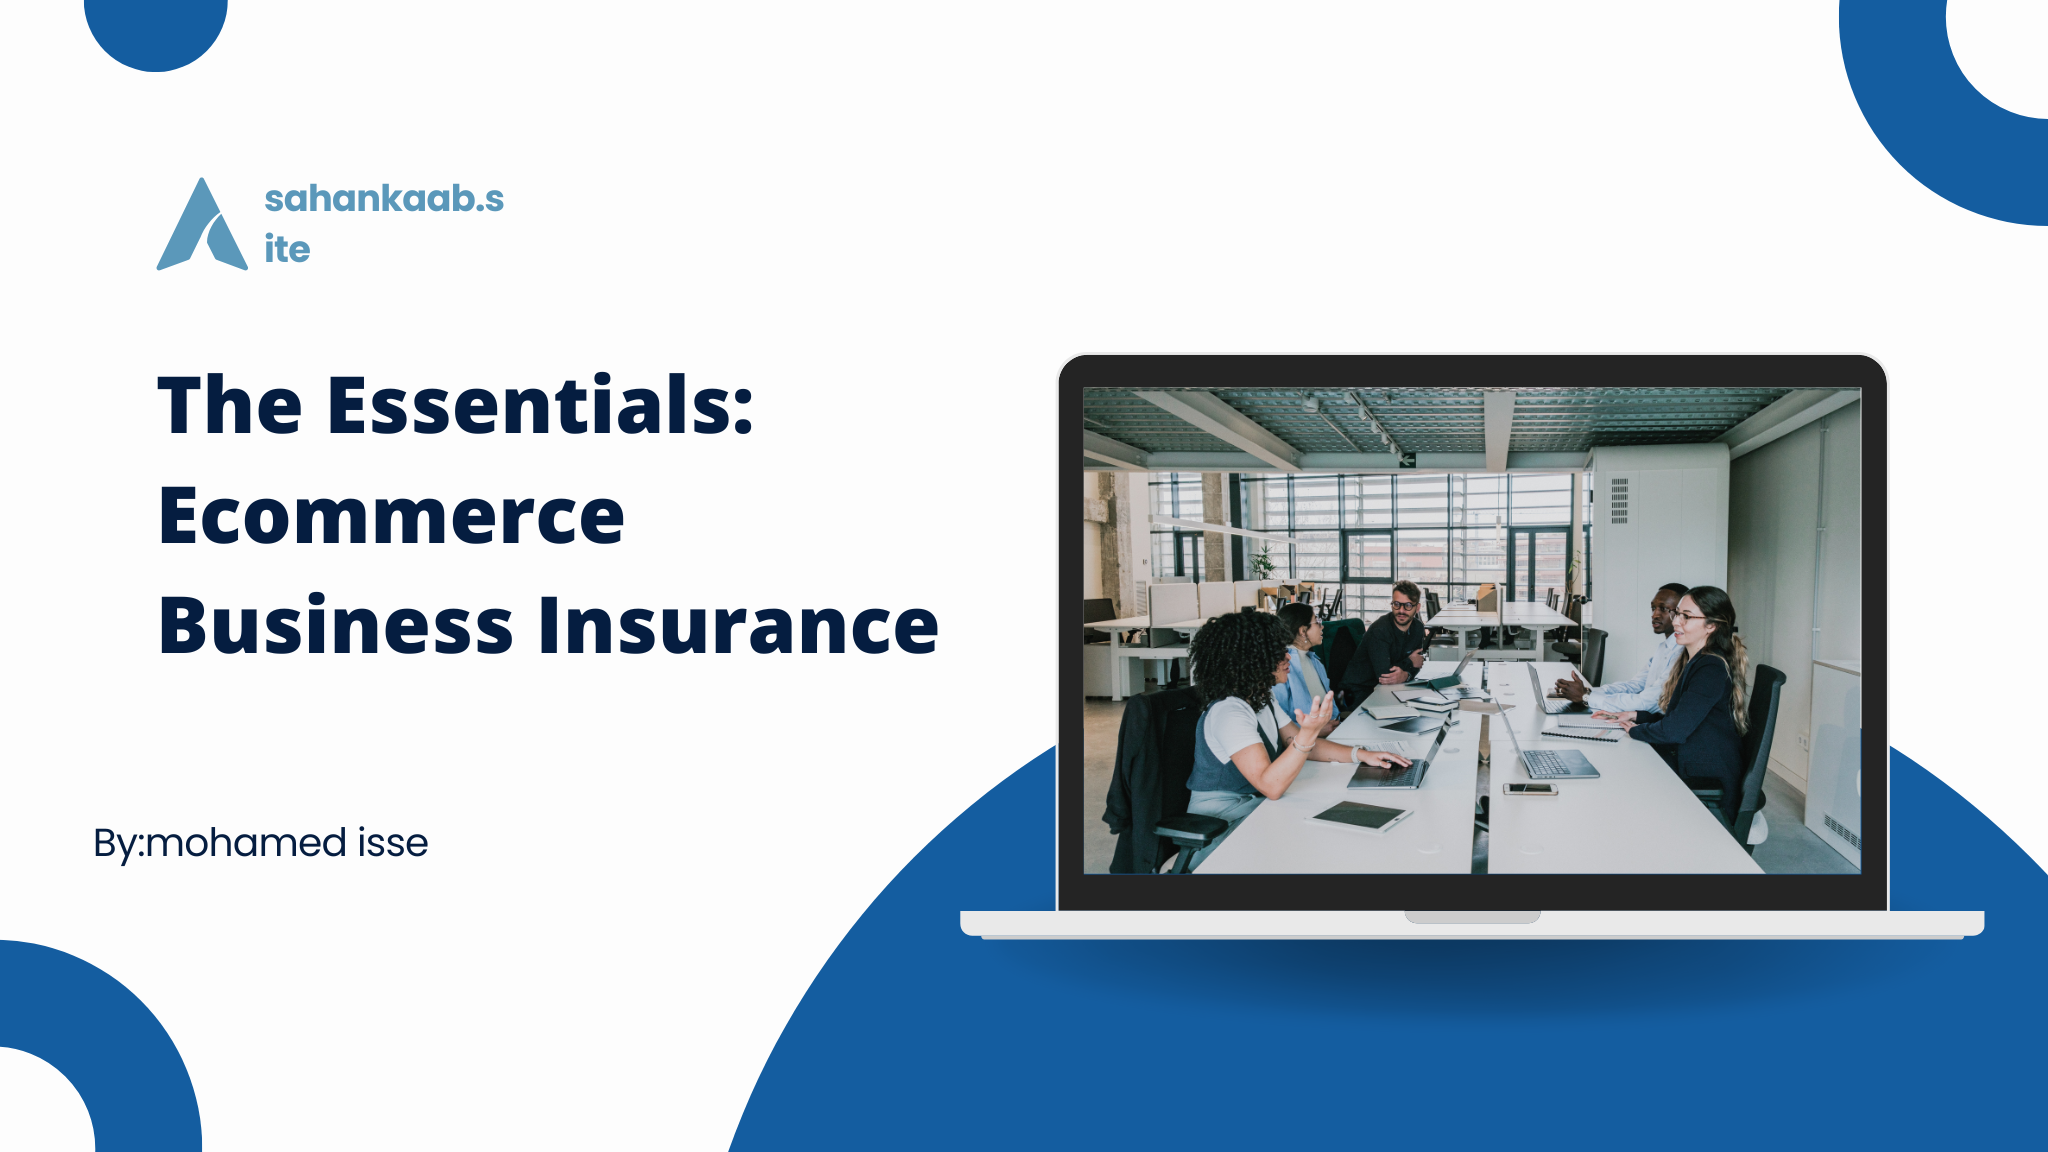 The Essentials: Ecommerce Business Insurance